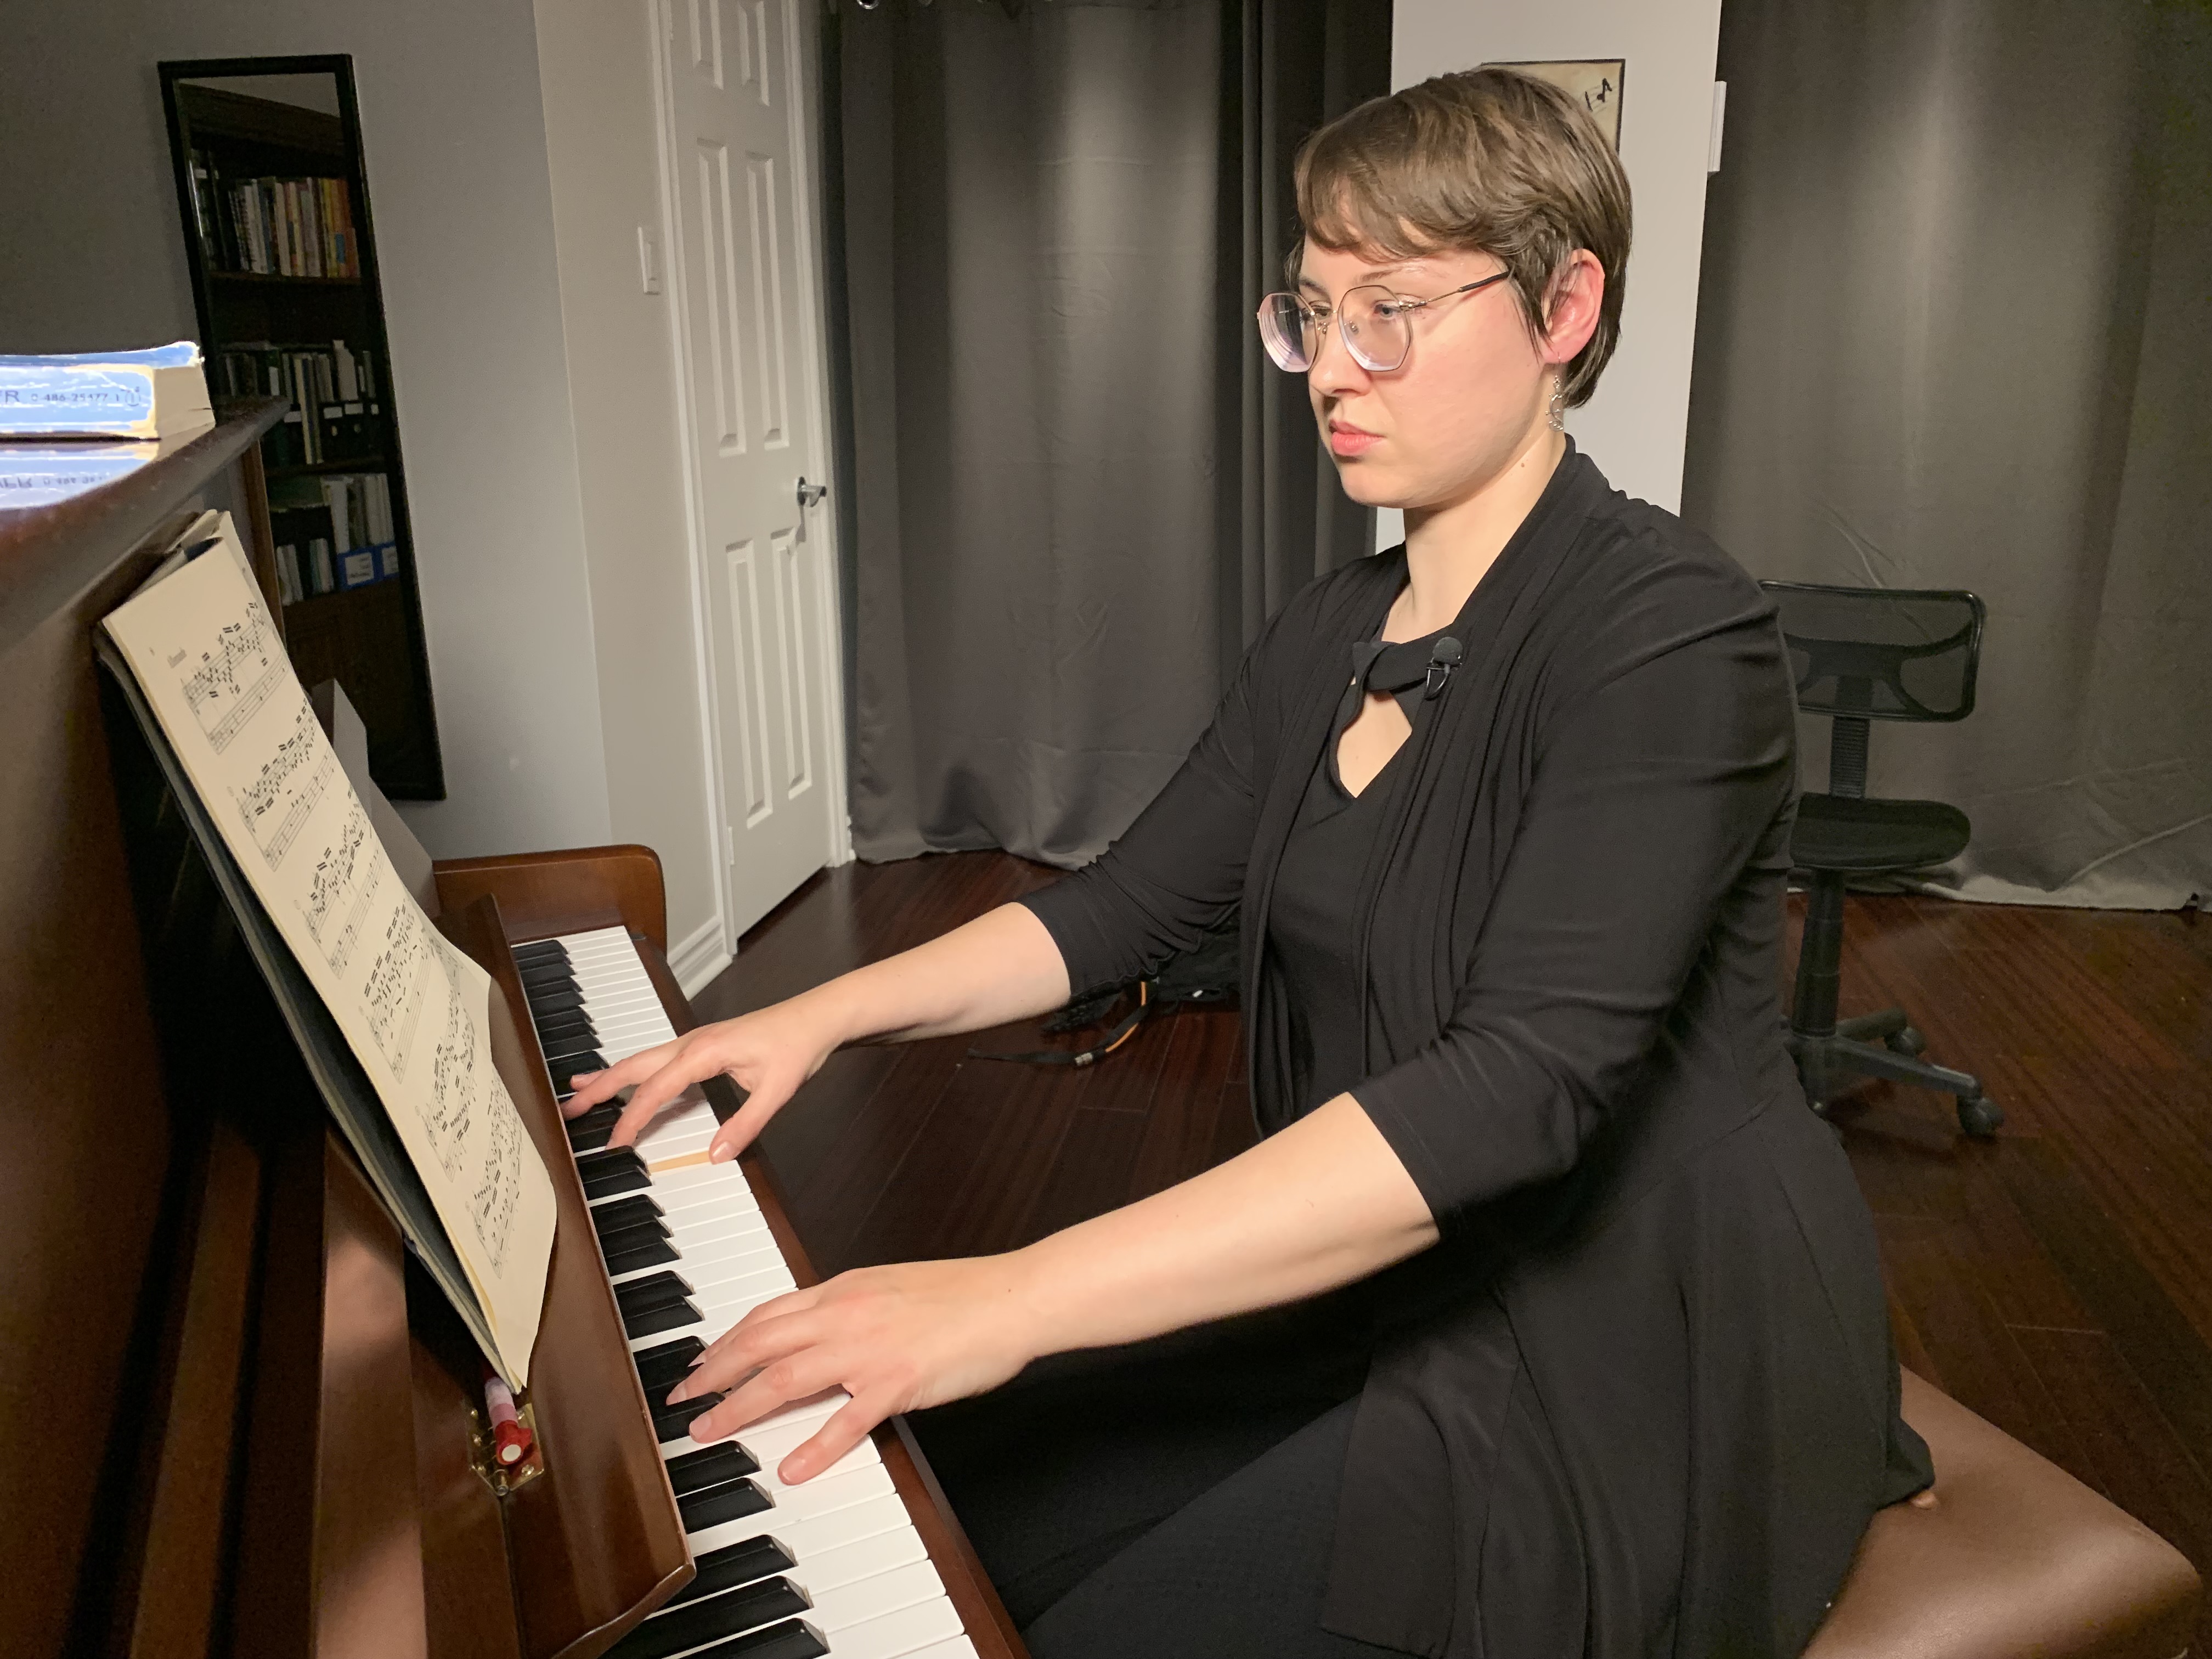 Alberta pianist stayed in Quebec after graduating. She worries tuition hikes mean others won’t follow suit